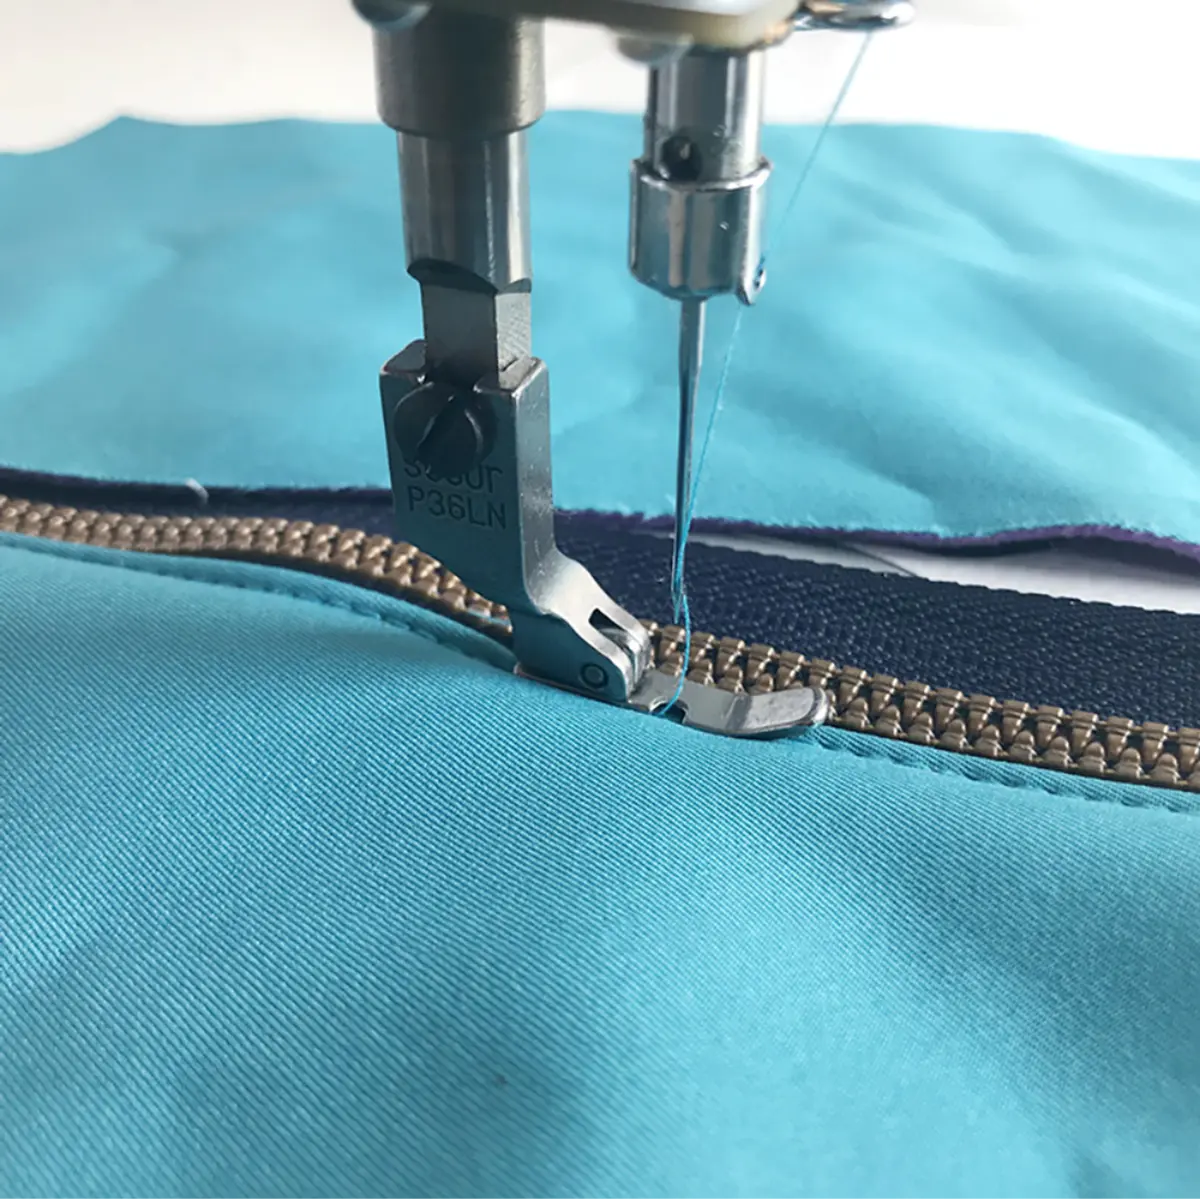 3 Way Hinged Zipper Cording And Straight Stitch Presser Foot